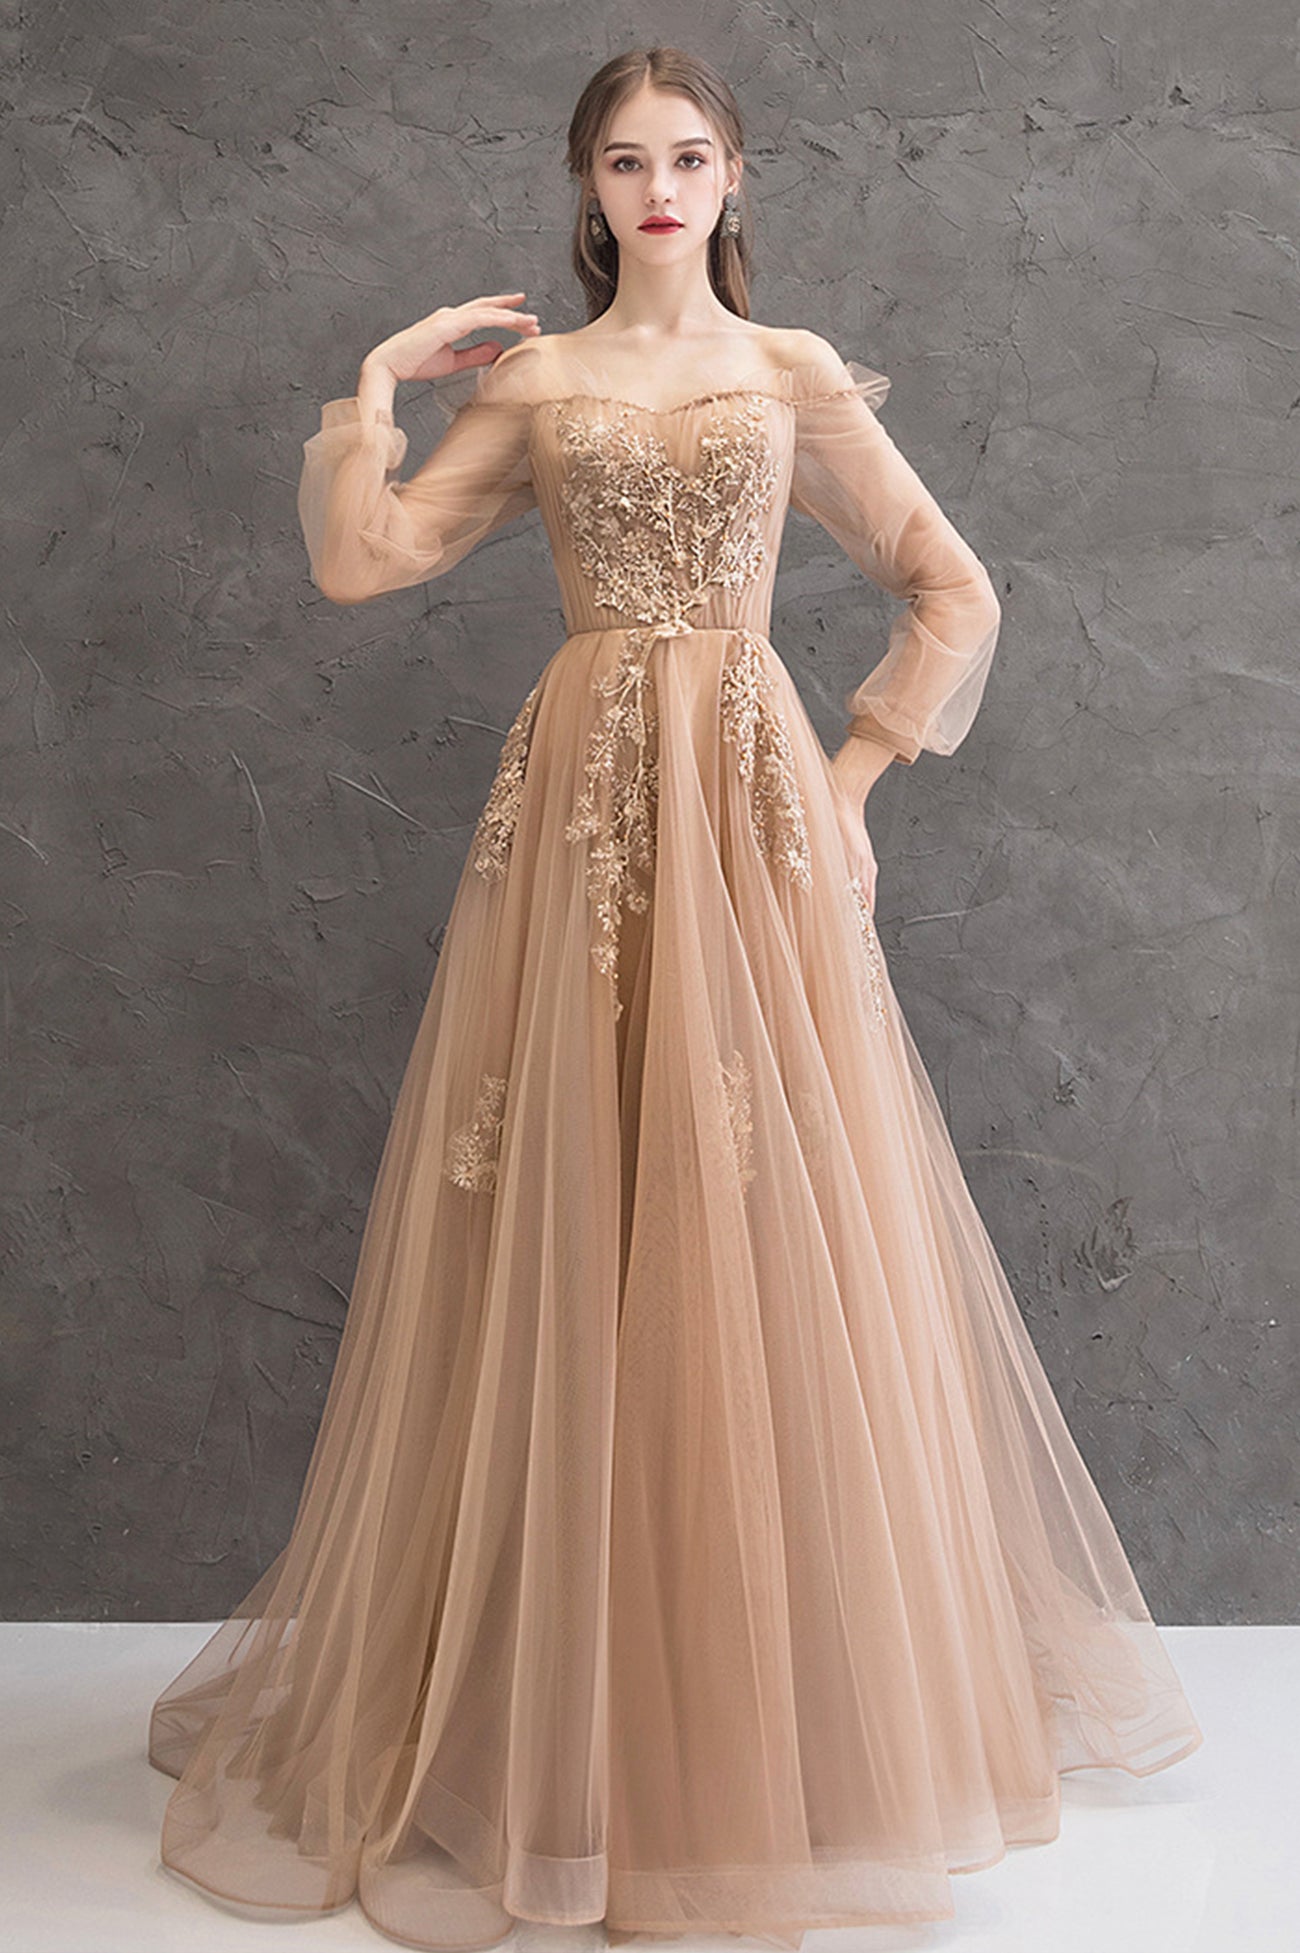 Cute Tulle Lace Off the Shoulder Evening Dress, Long Sleeve  A-Line Prom Dress